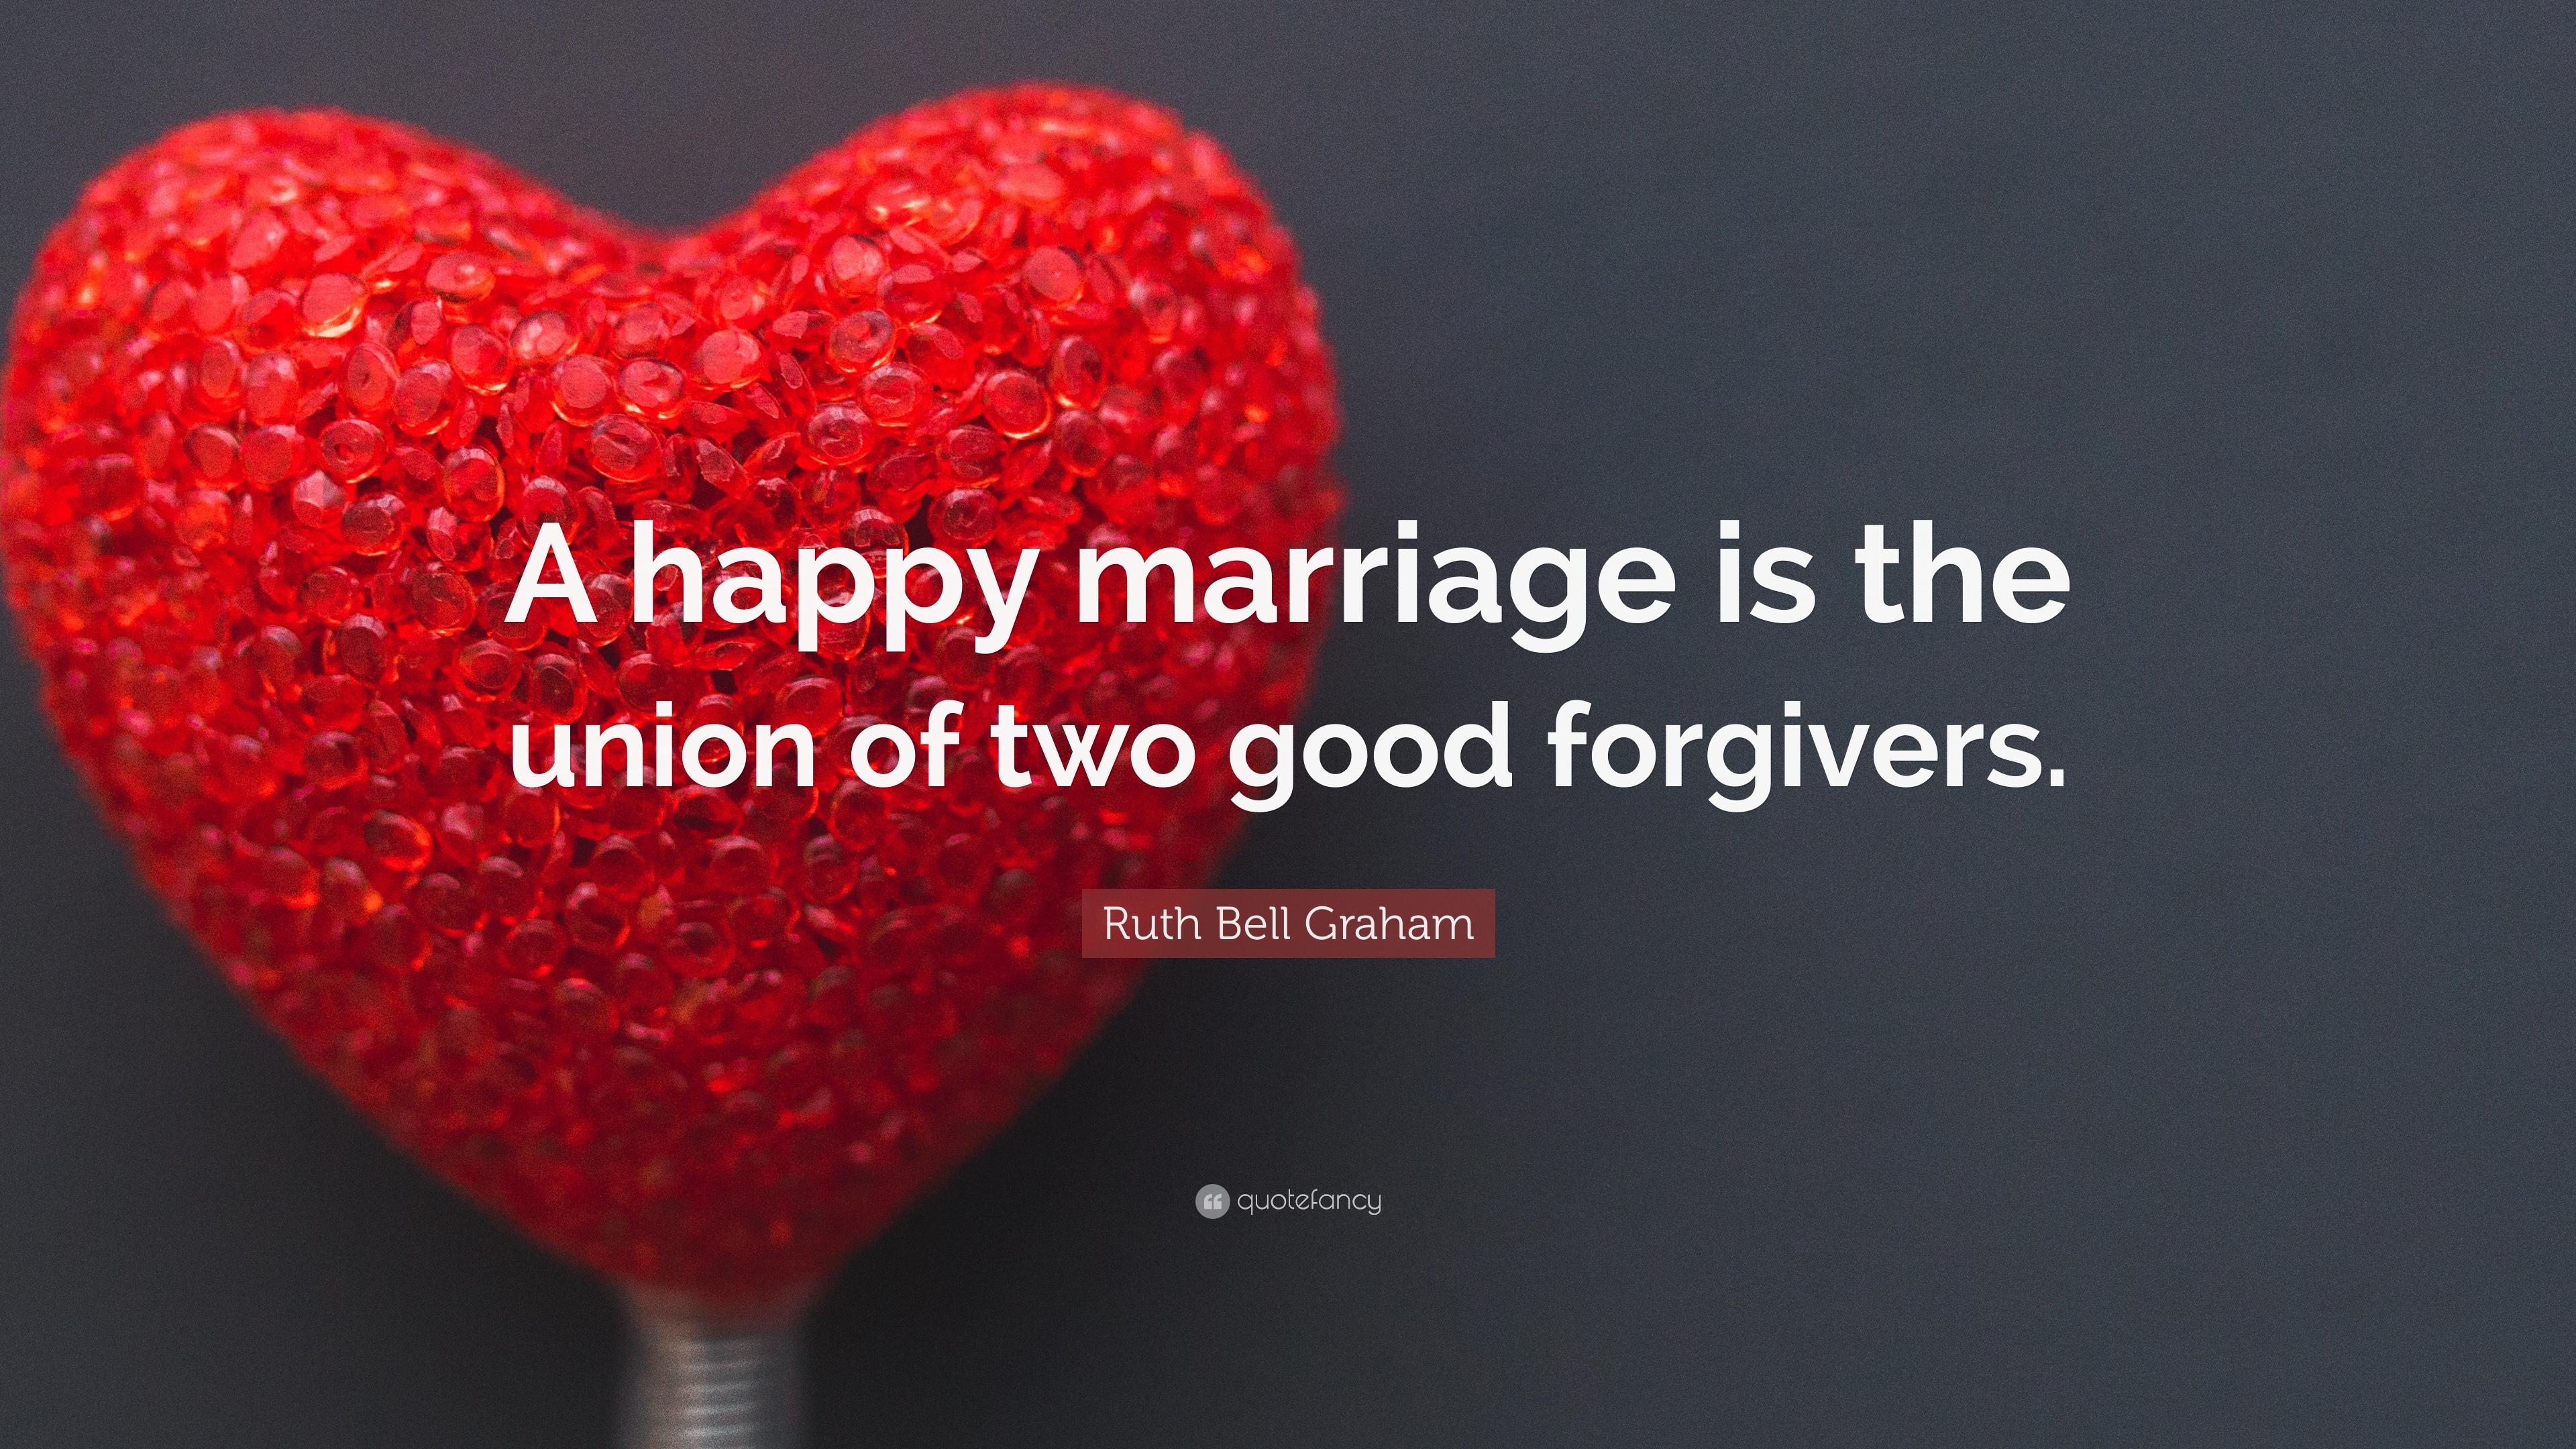 Ruth Bell Graham Quote: “A happy marriage is the union of two good